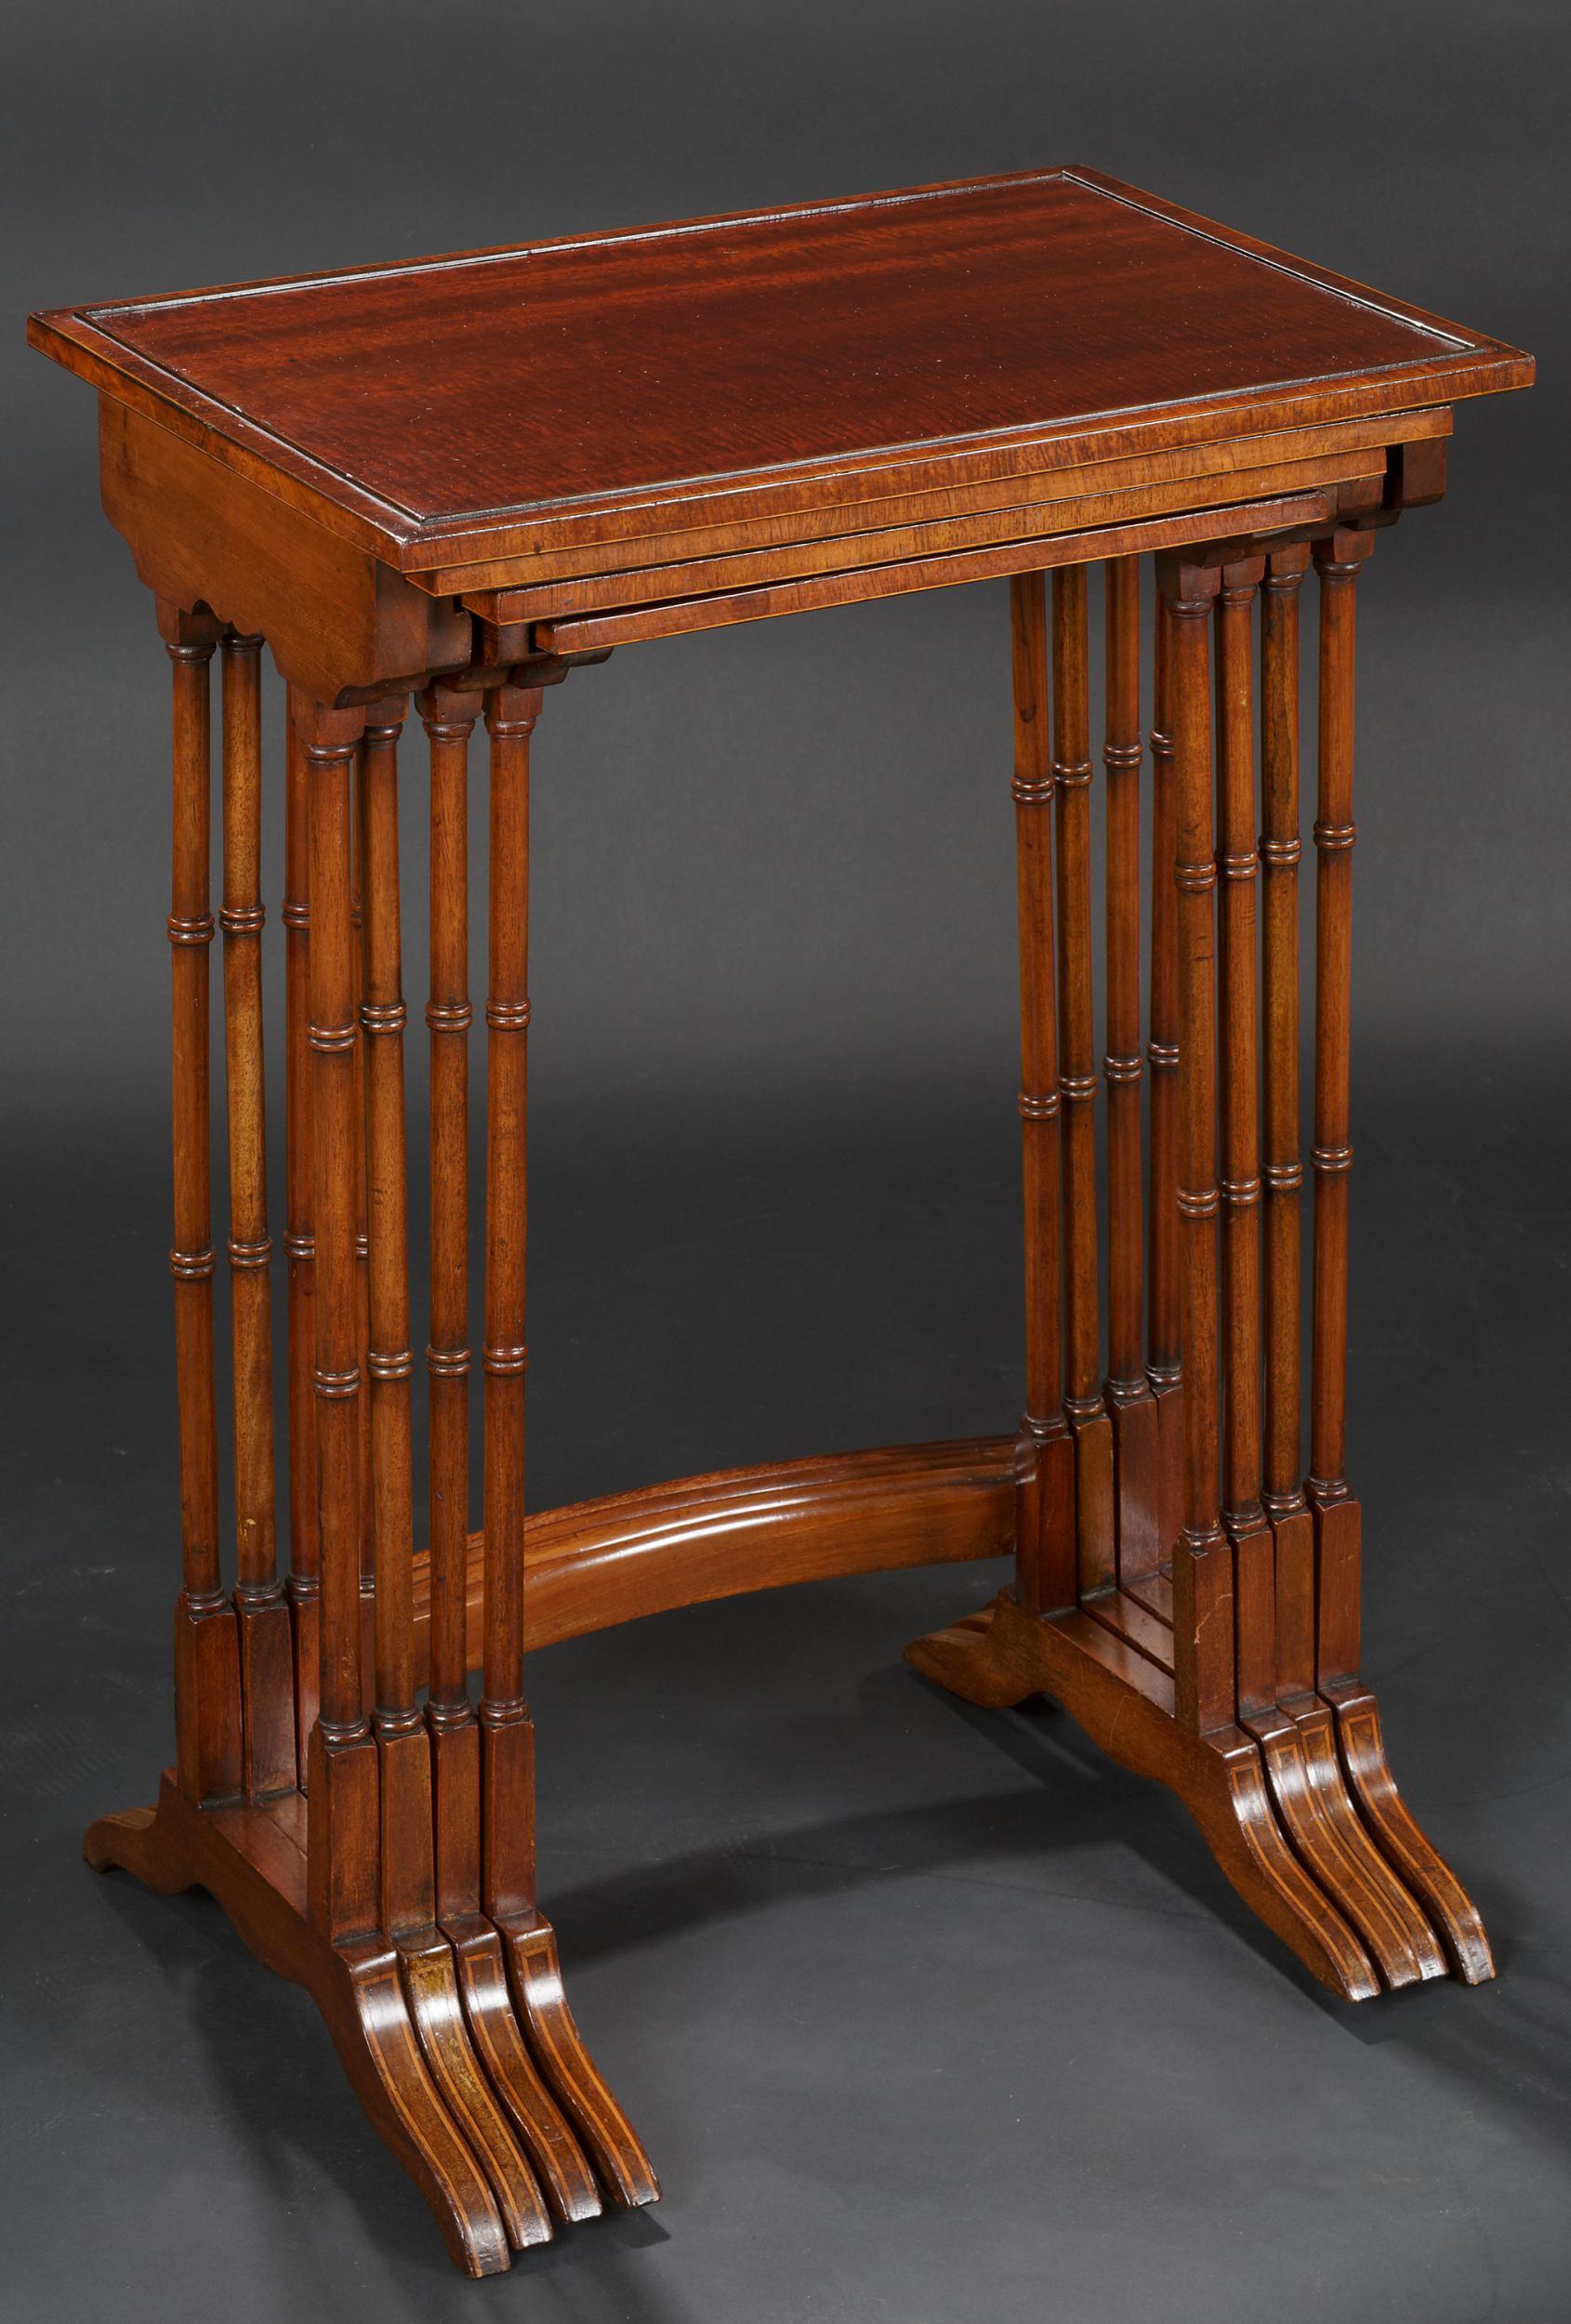 Edwardian nest of 4 tables

Edwardian inlaid mahogany nest of four tables with bow front stretcher, c.1900.